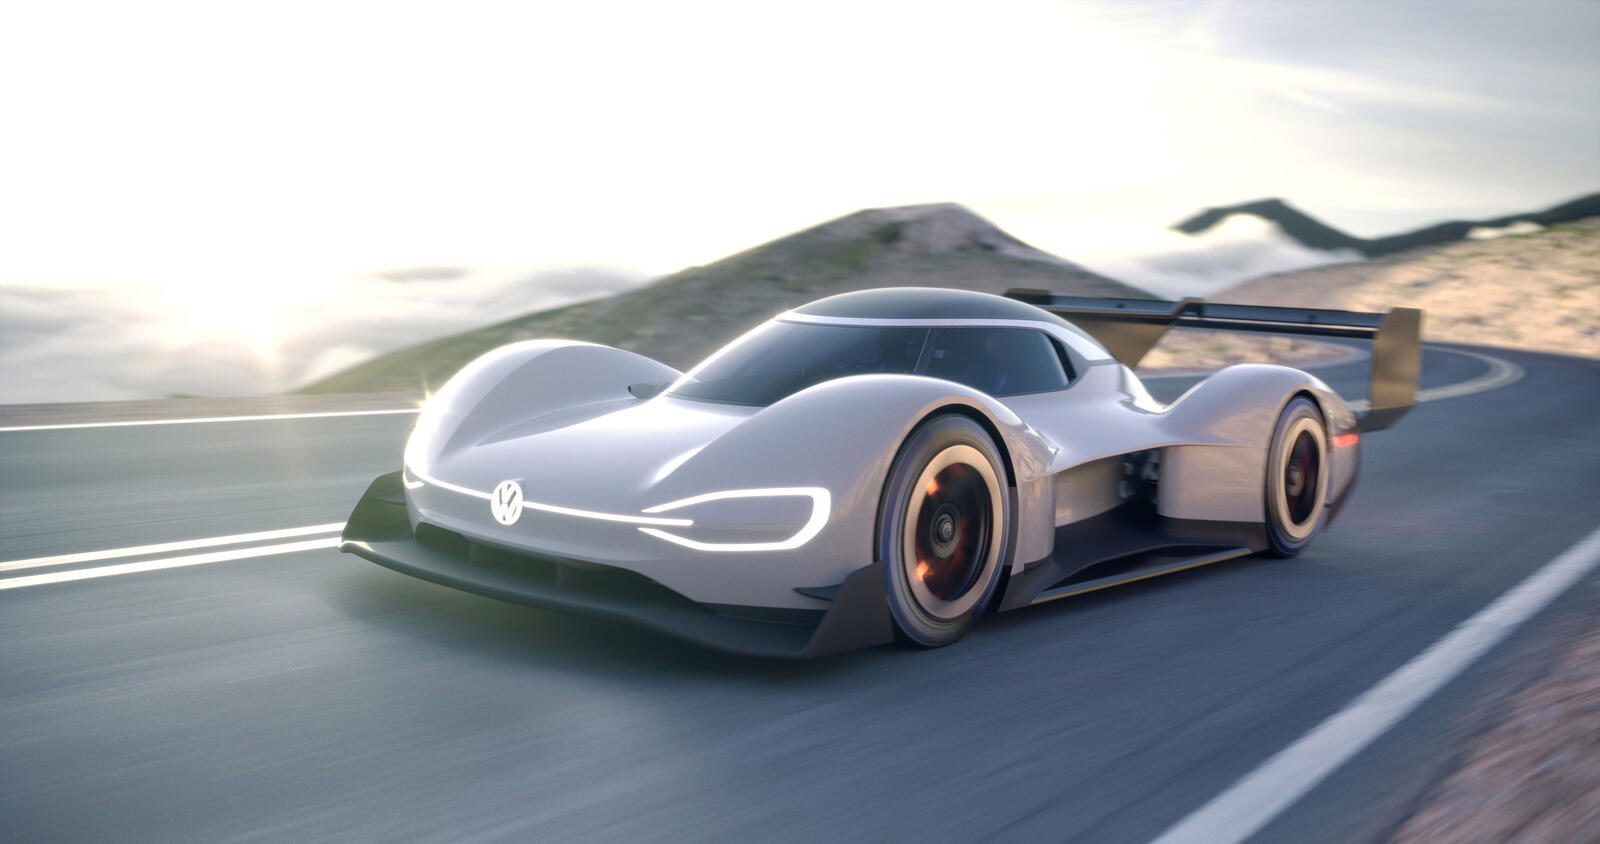 Free photo The volkswagen idr concept car in white